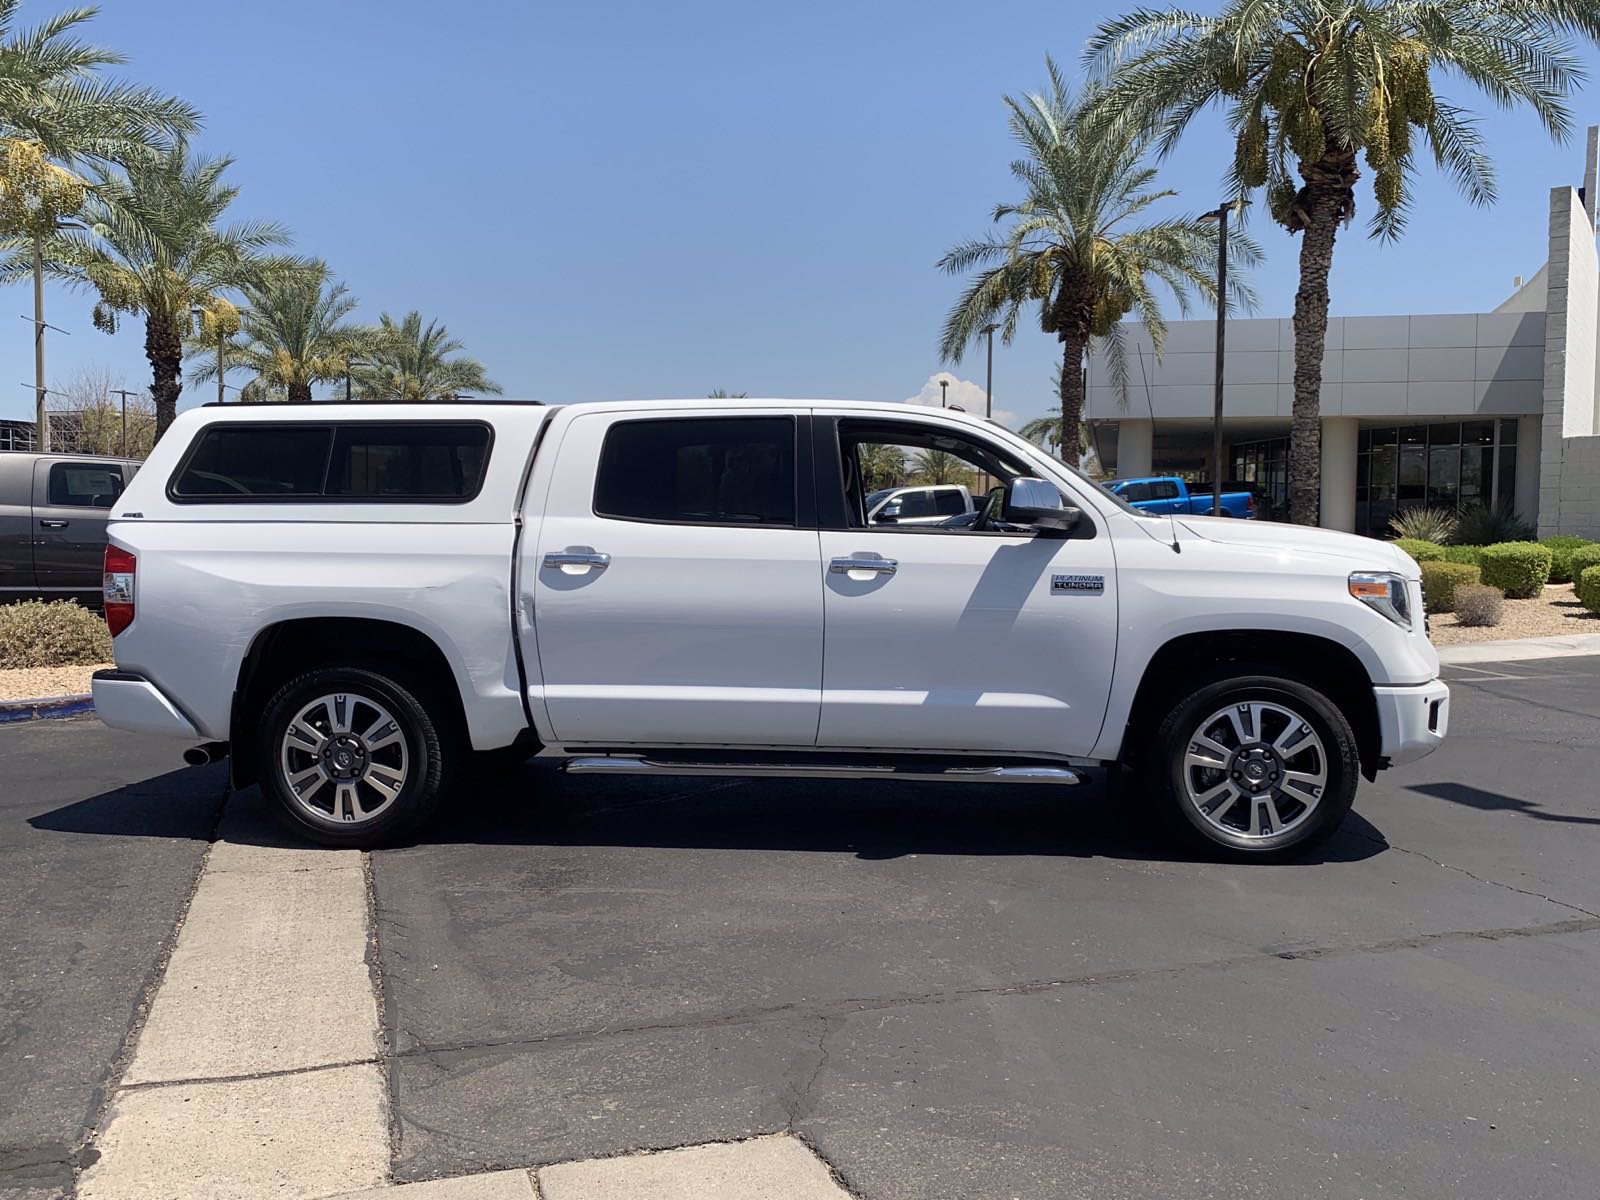 Pre-Owned 2019 Toyota Tundra 4WD Platinum Crew Cab Pickup in Tempe #